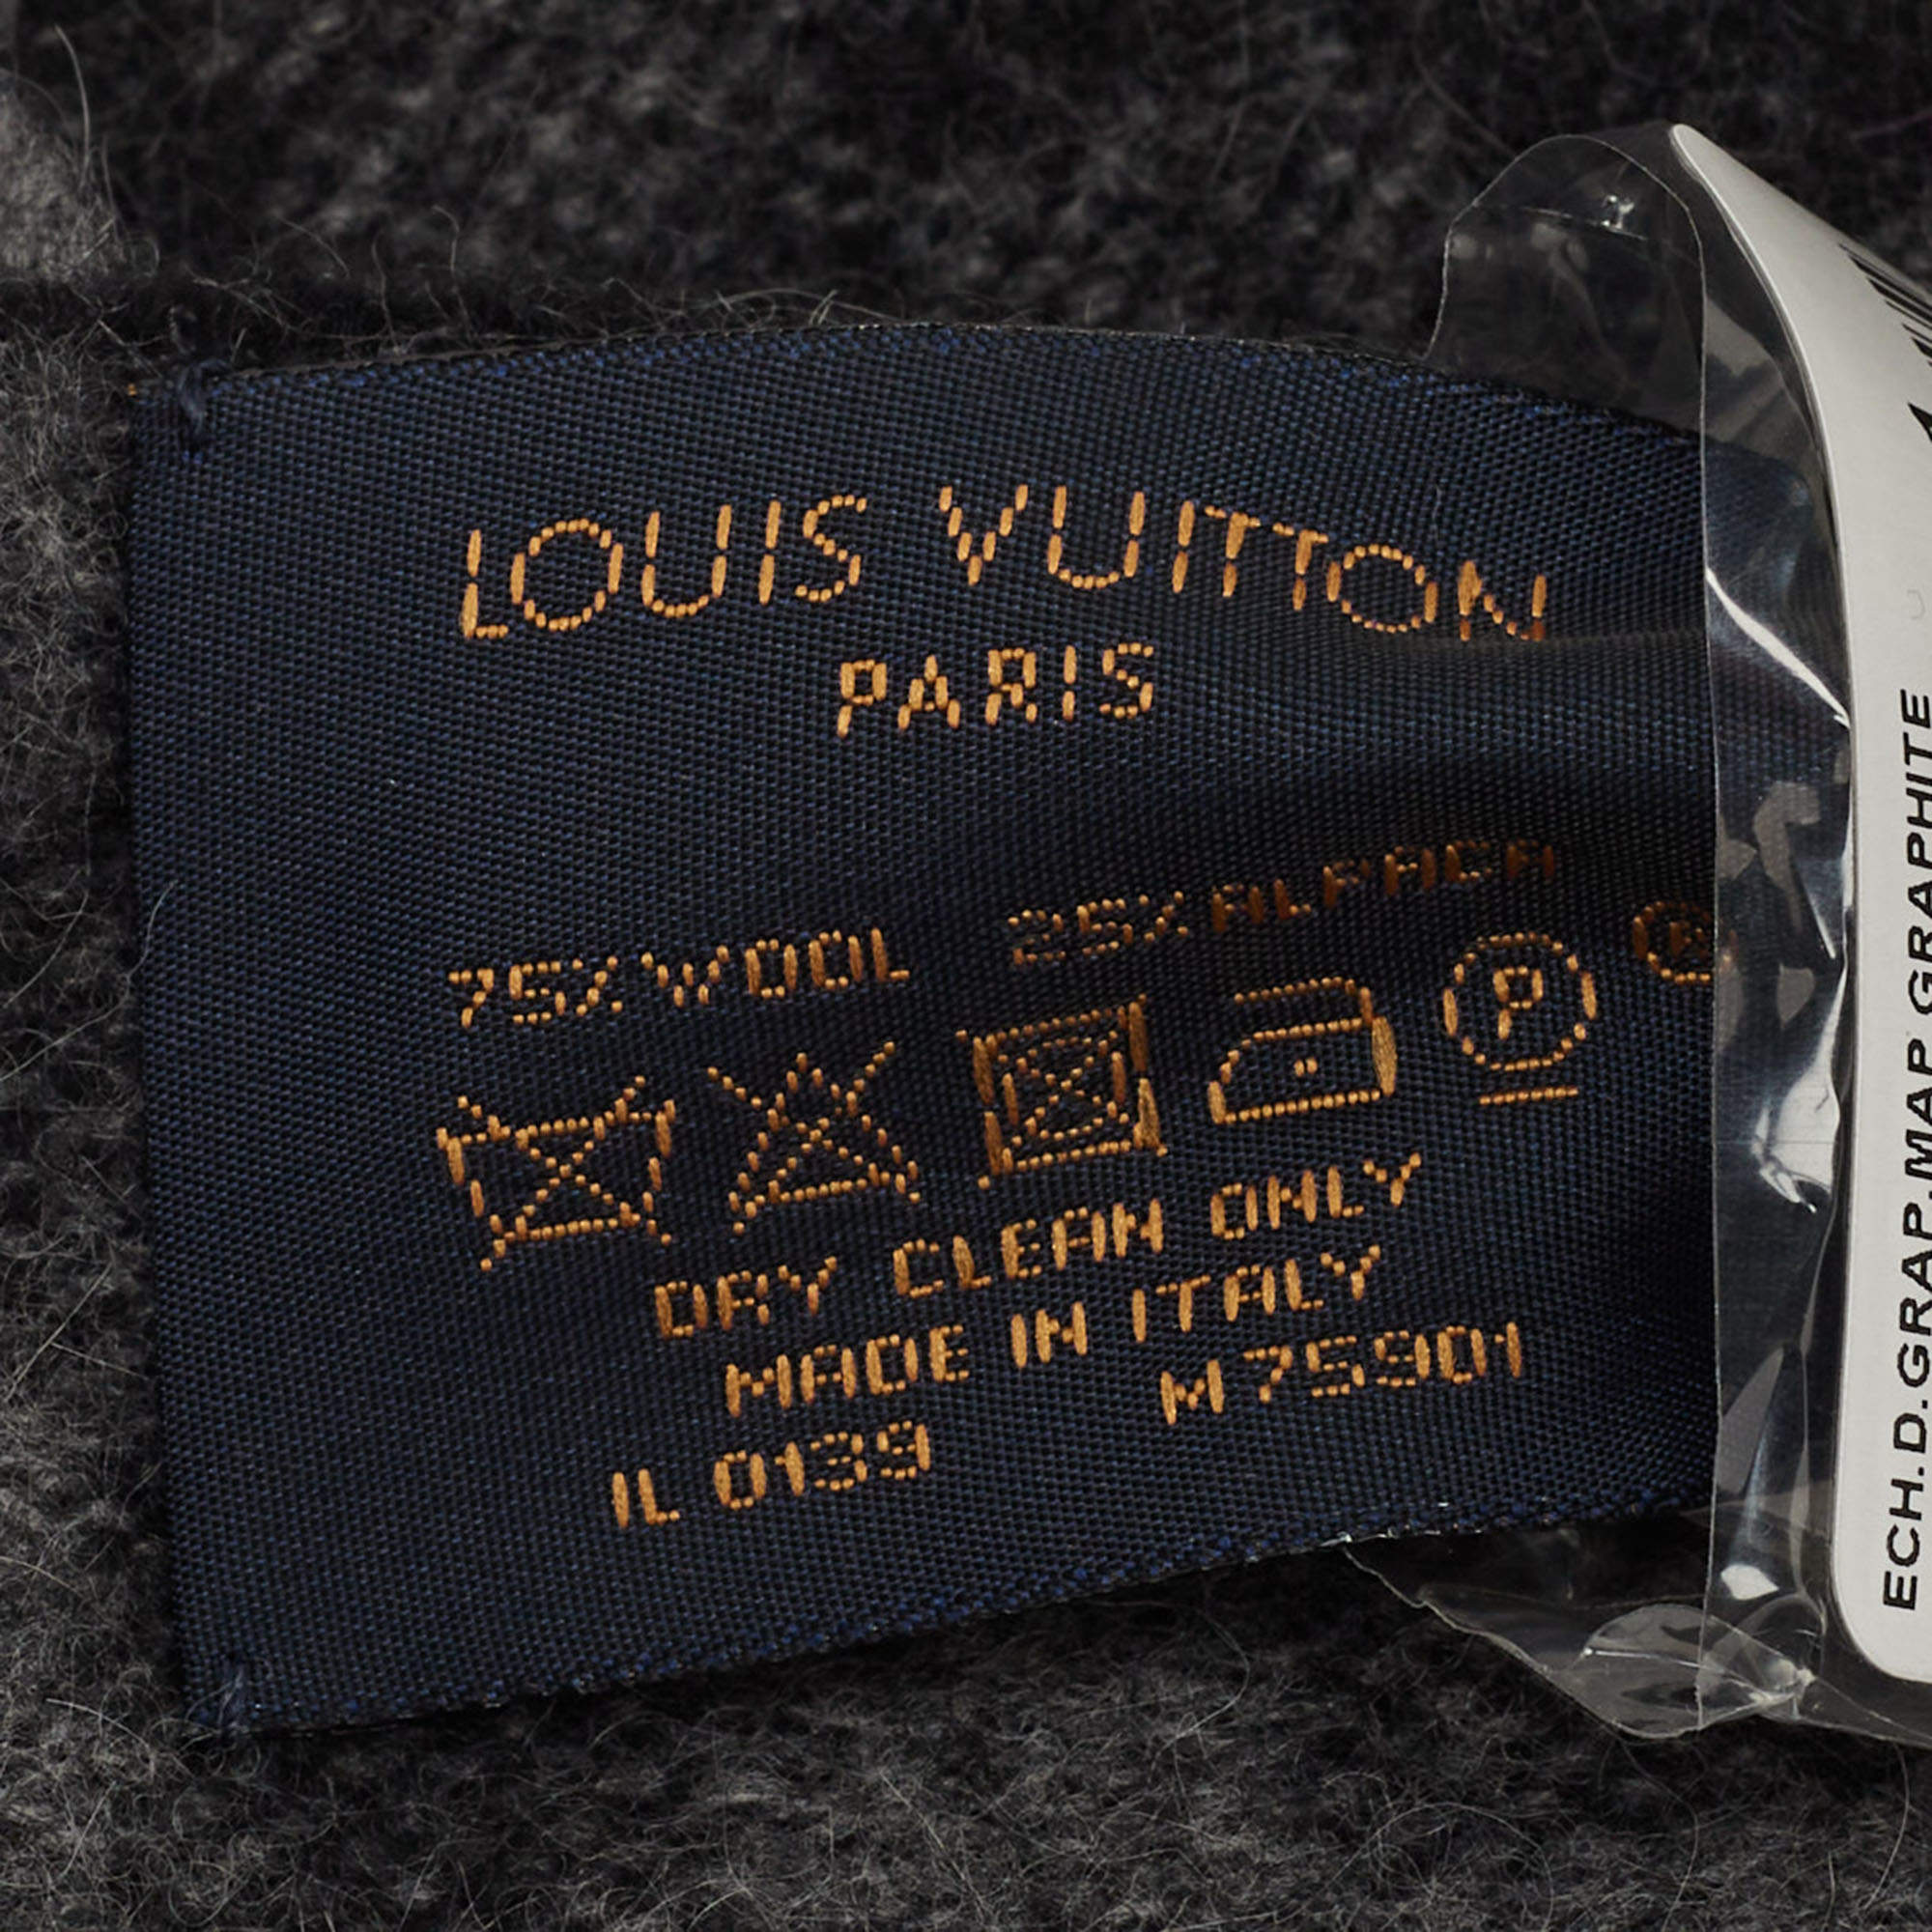 Real Louis Vuitton Scarf Label